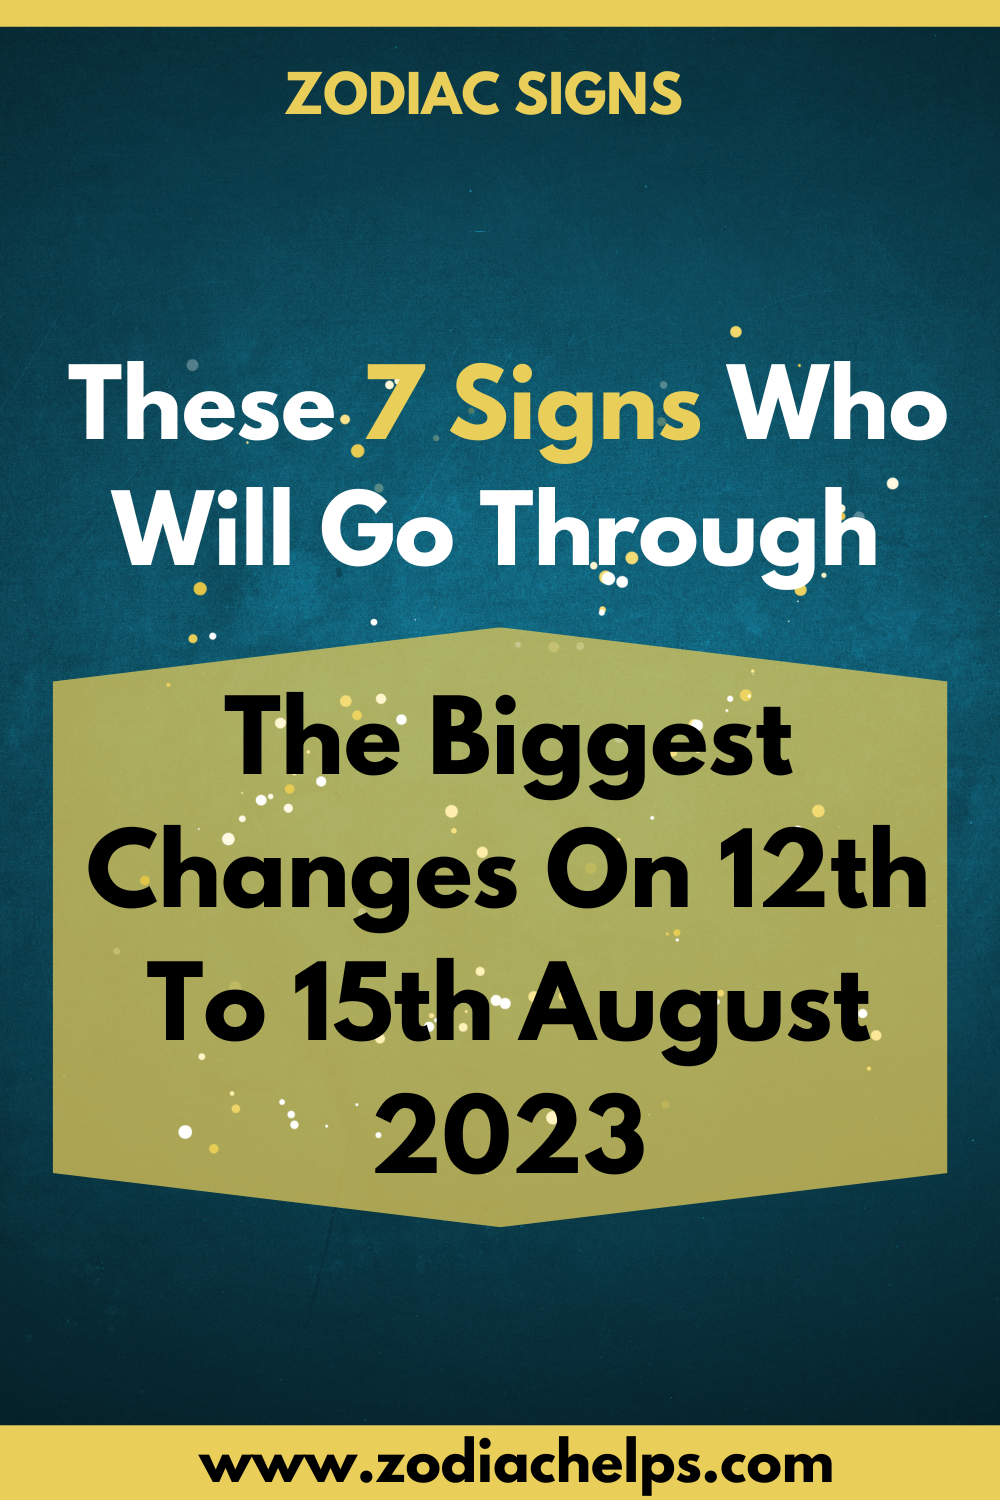 These 7 Signs Who Will Go Through The Biggest Changes On 12th To 15th August 2023